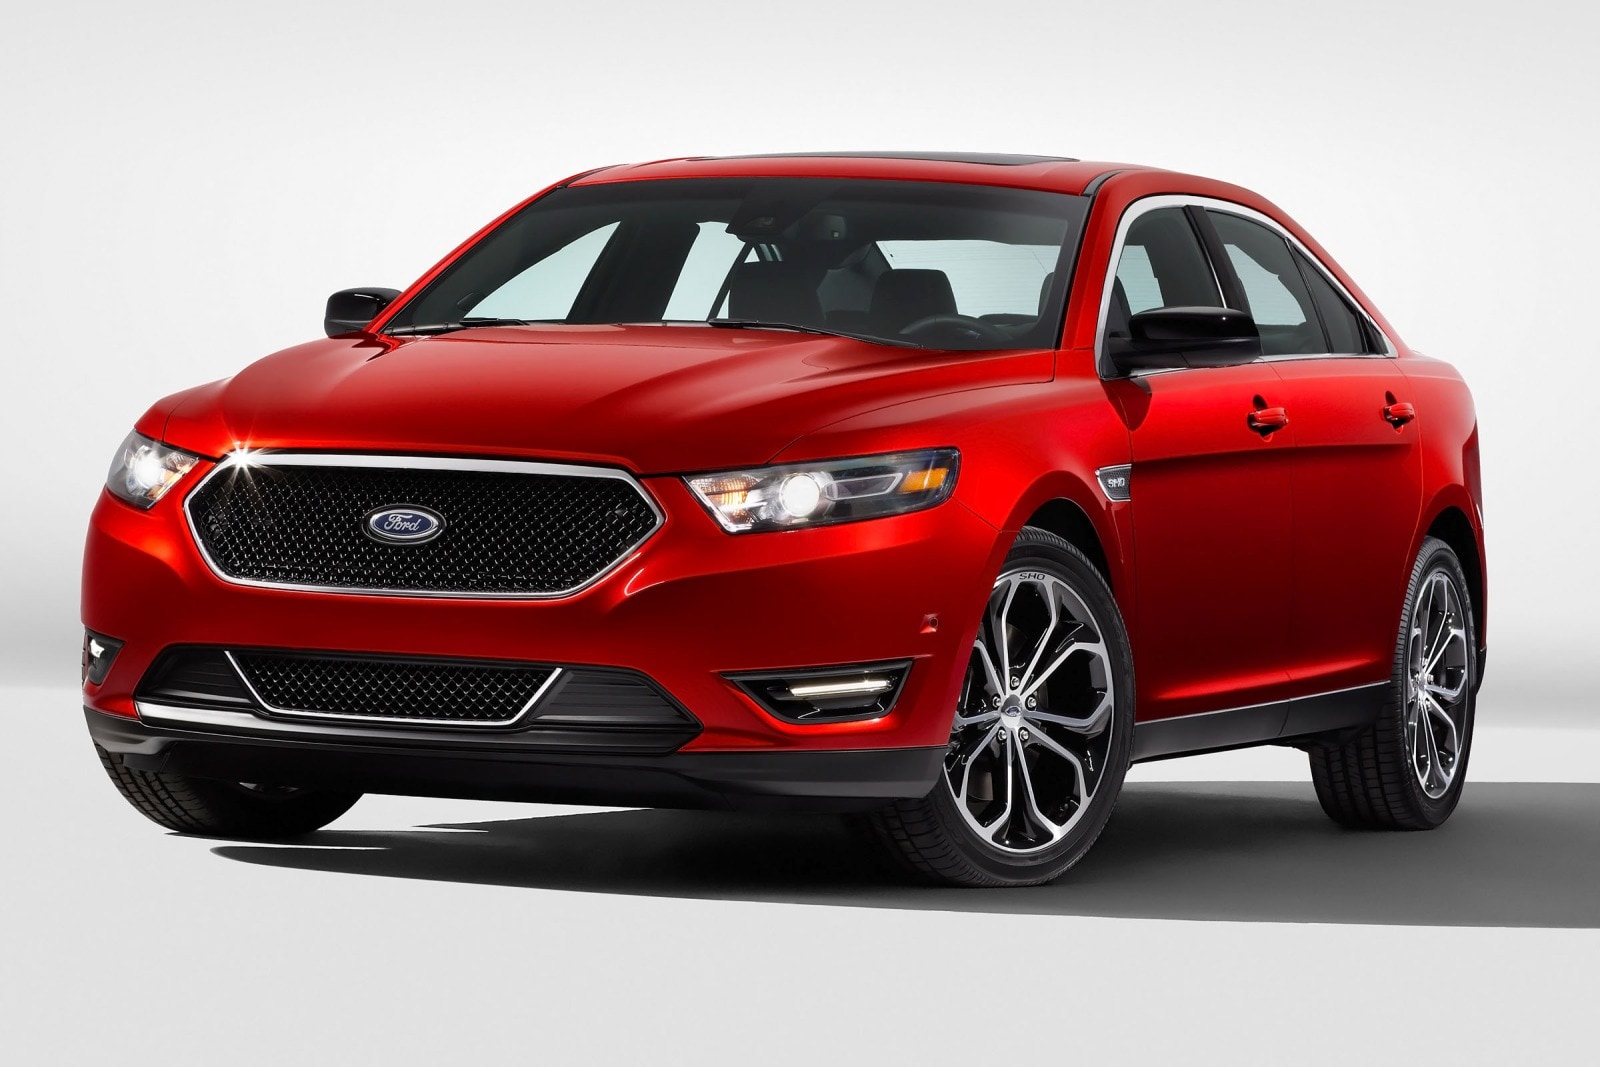 Used 2013 Ford Taurus SHO Review | Edmunds